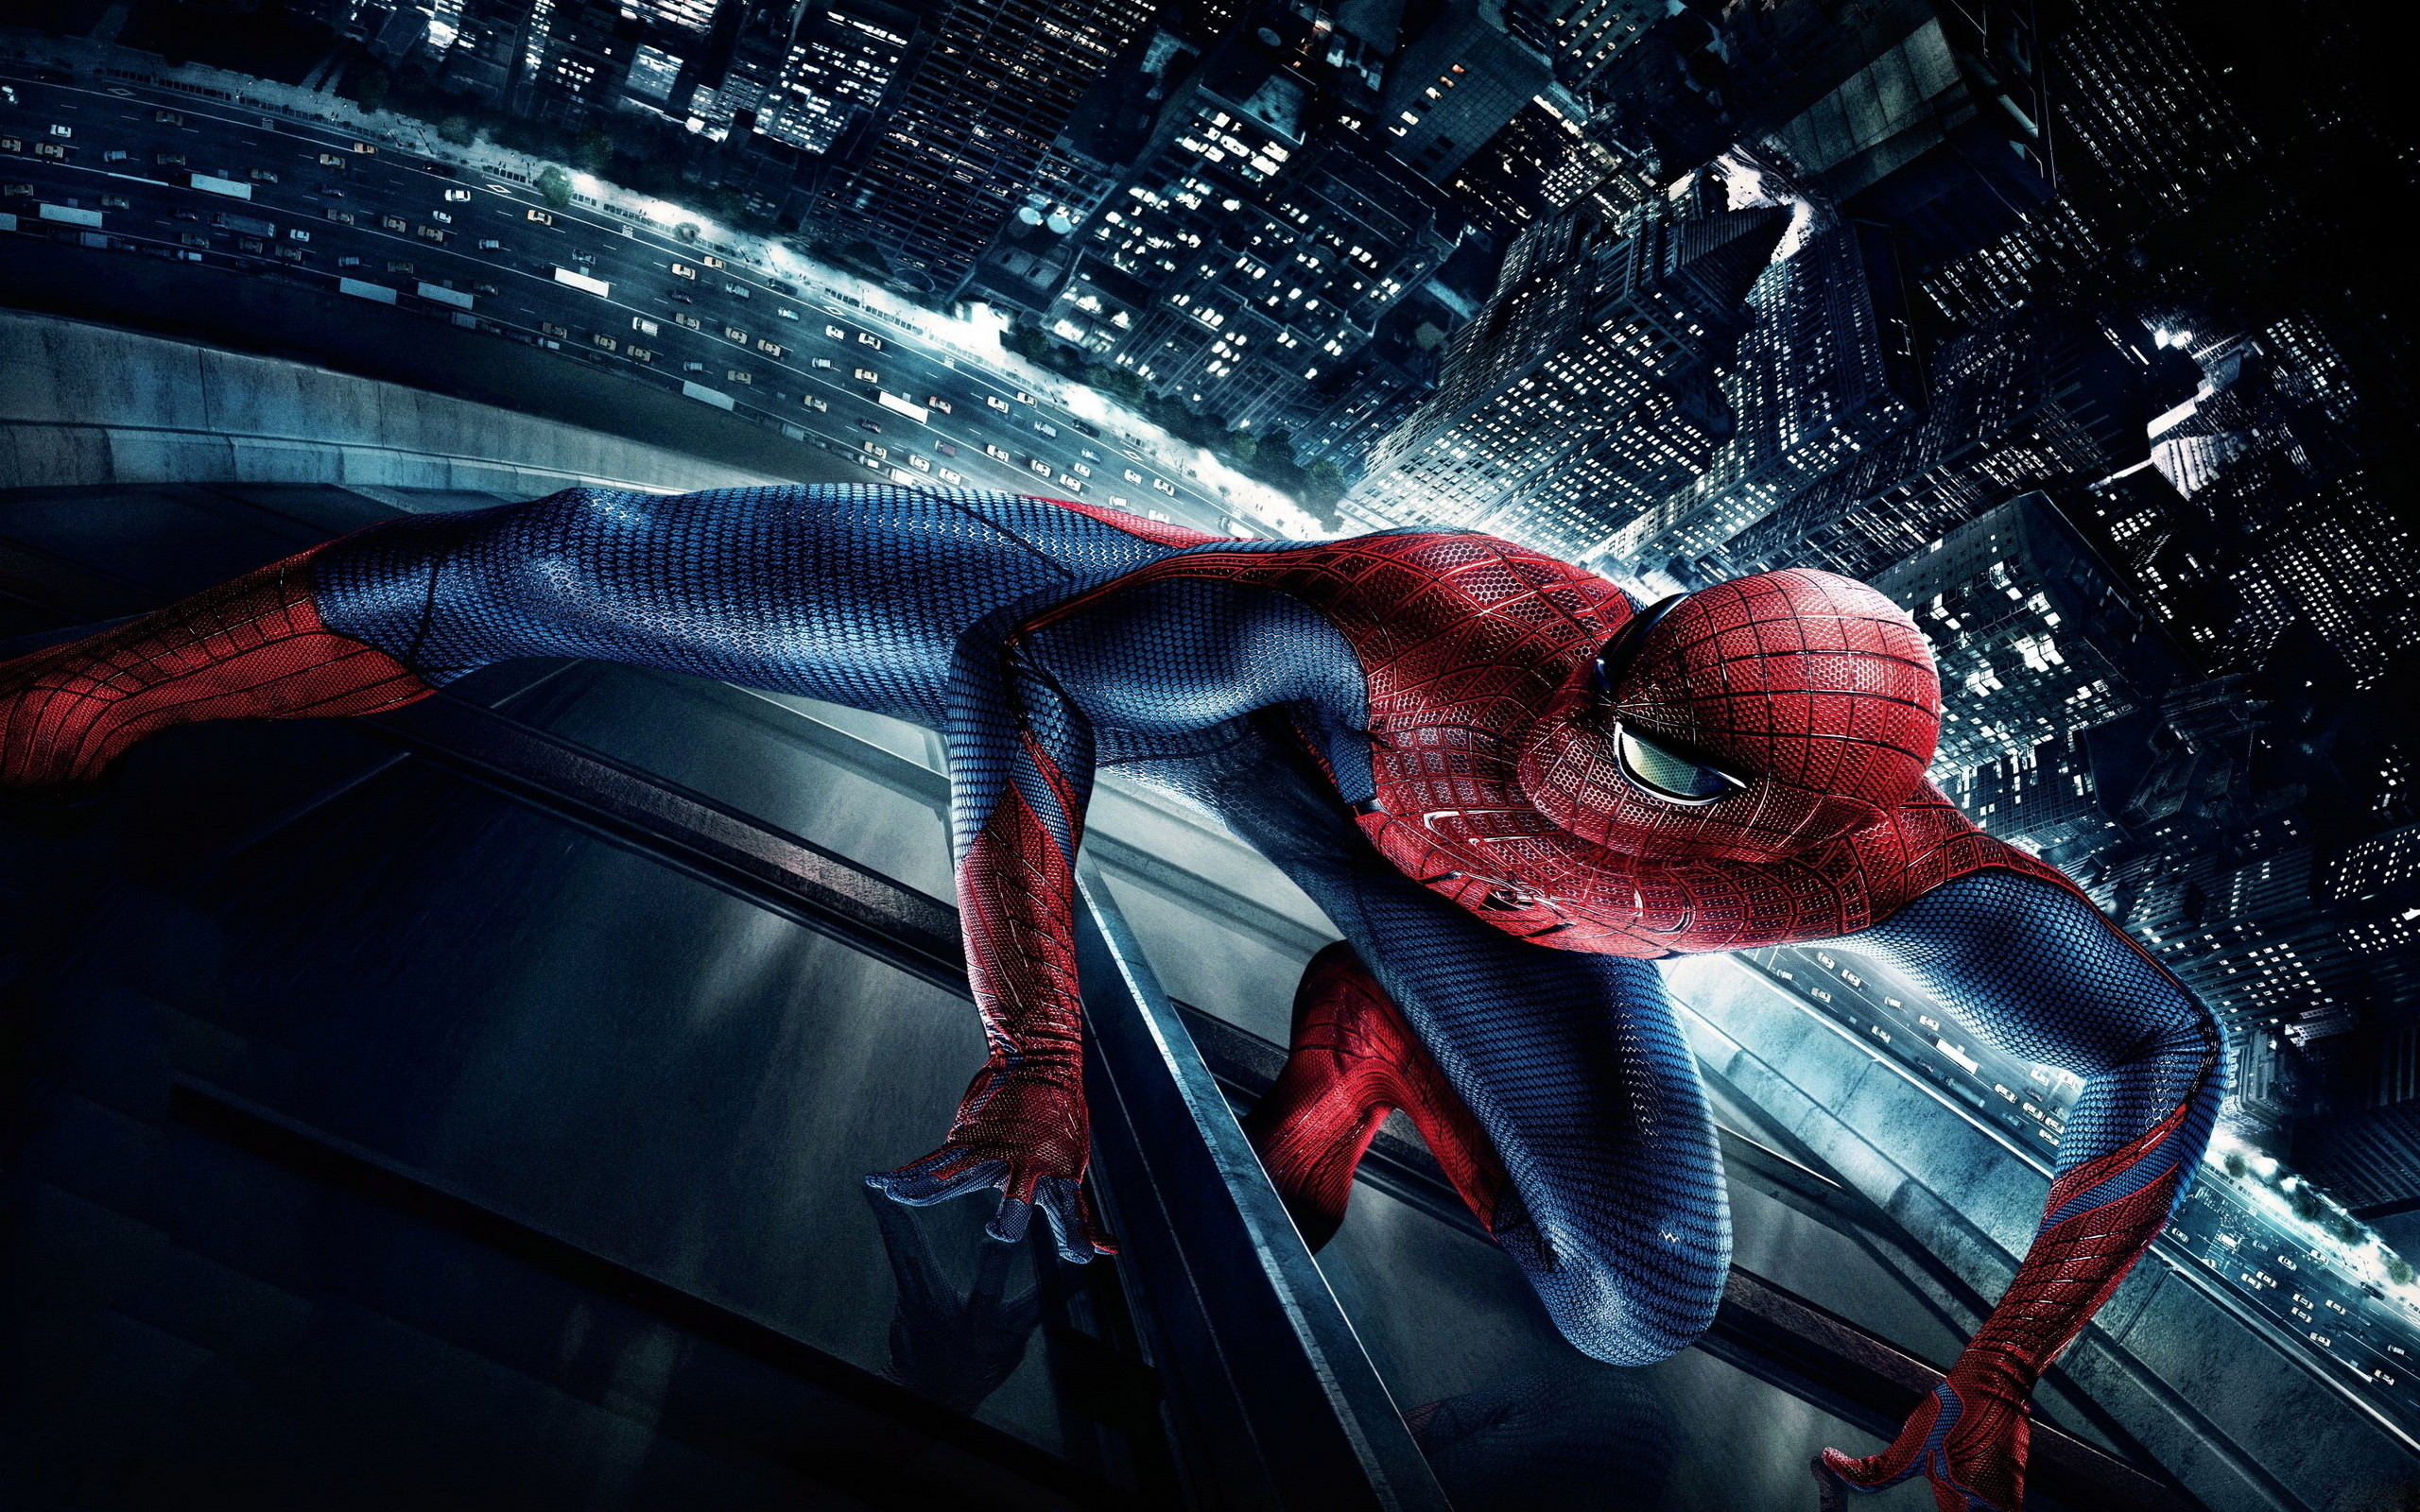 2560x1600 0 Spiderman Wallpapers For Tablet Group Spiderman Wallpapers For Tablet  Group